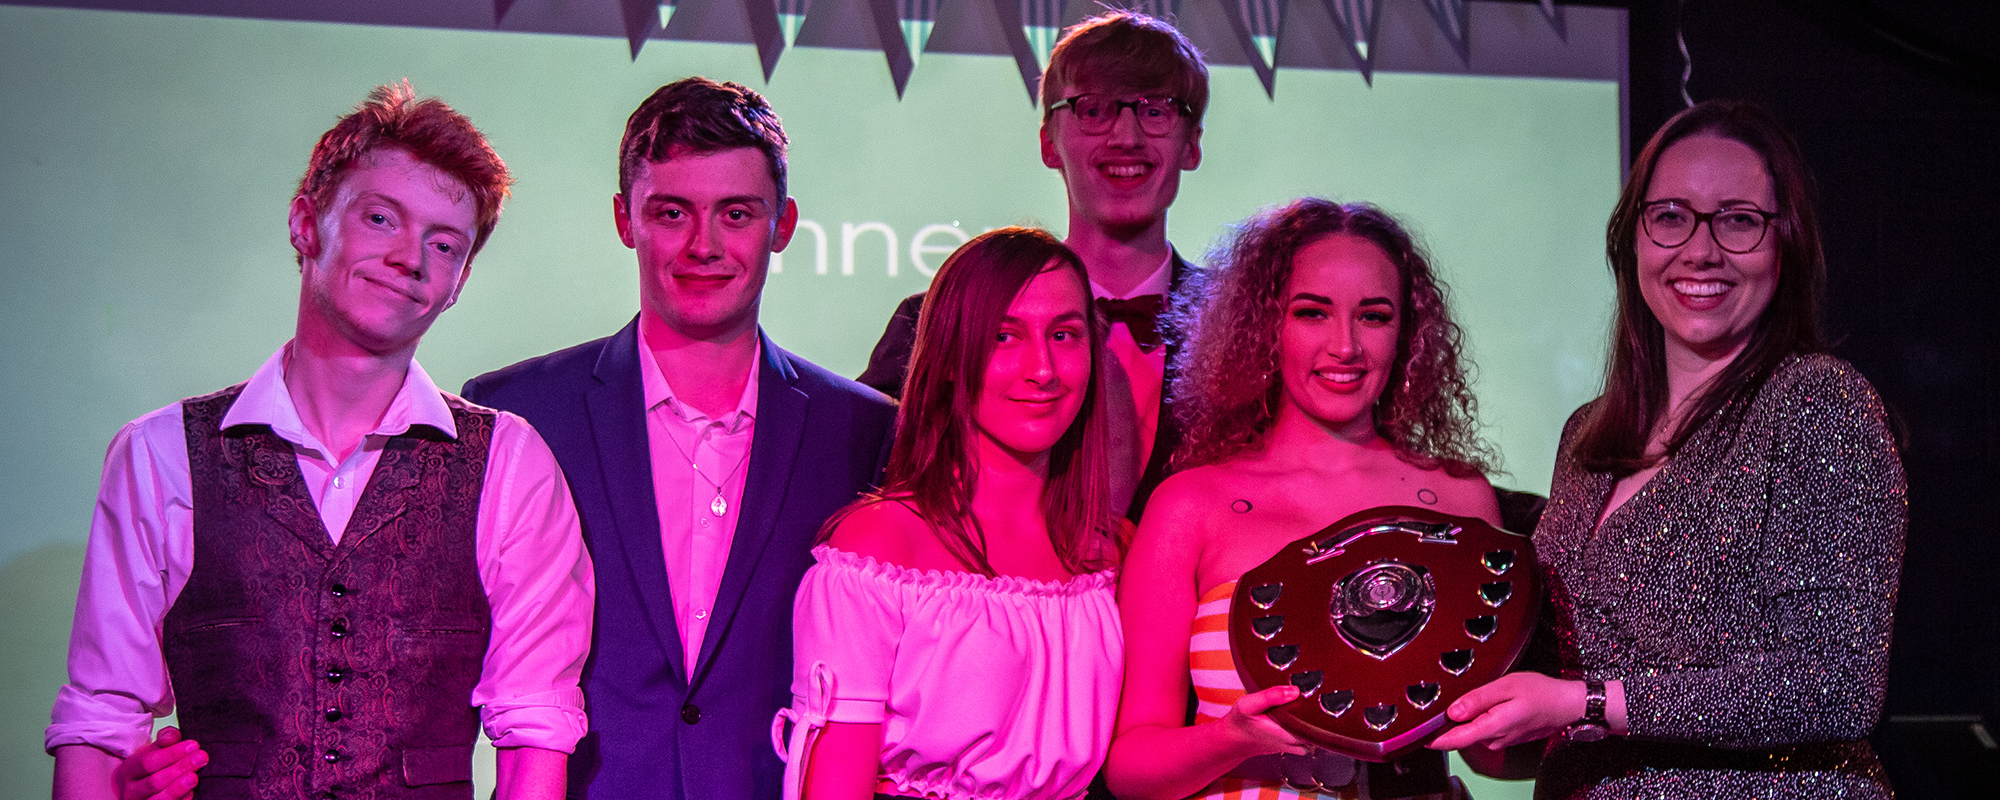 From great student lead events and society activities to recognising the great work done by staff across the university – everyone’s successes should be recognised.